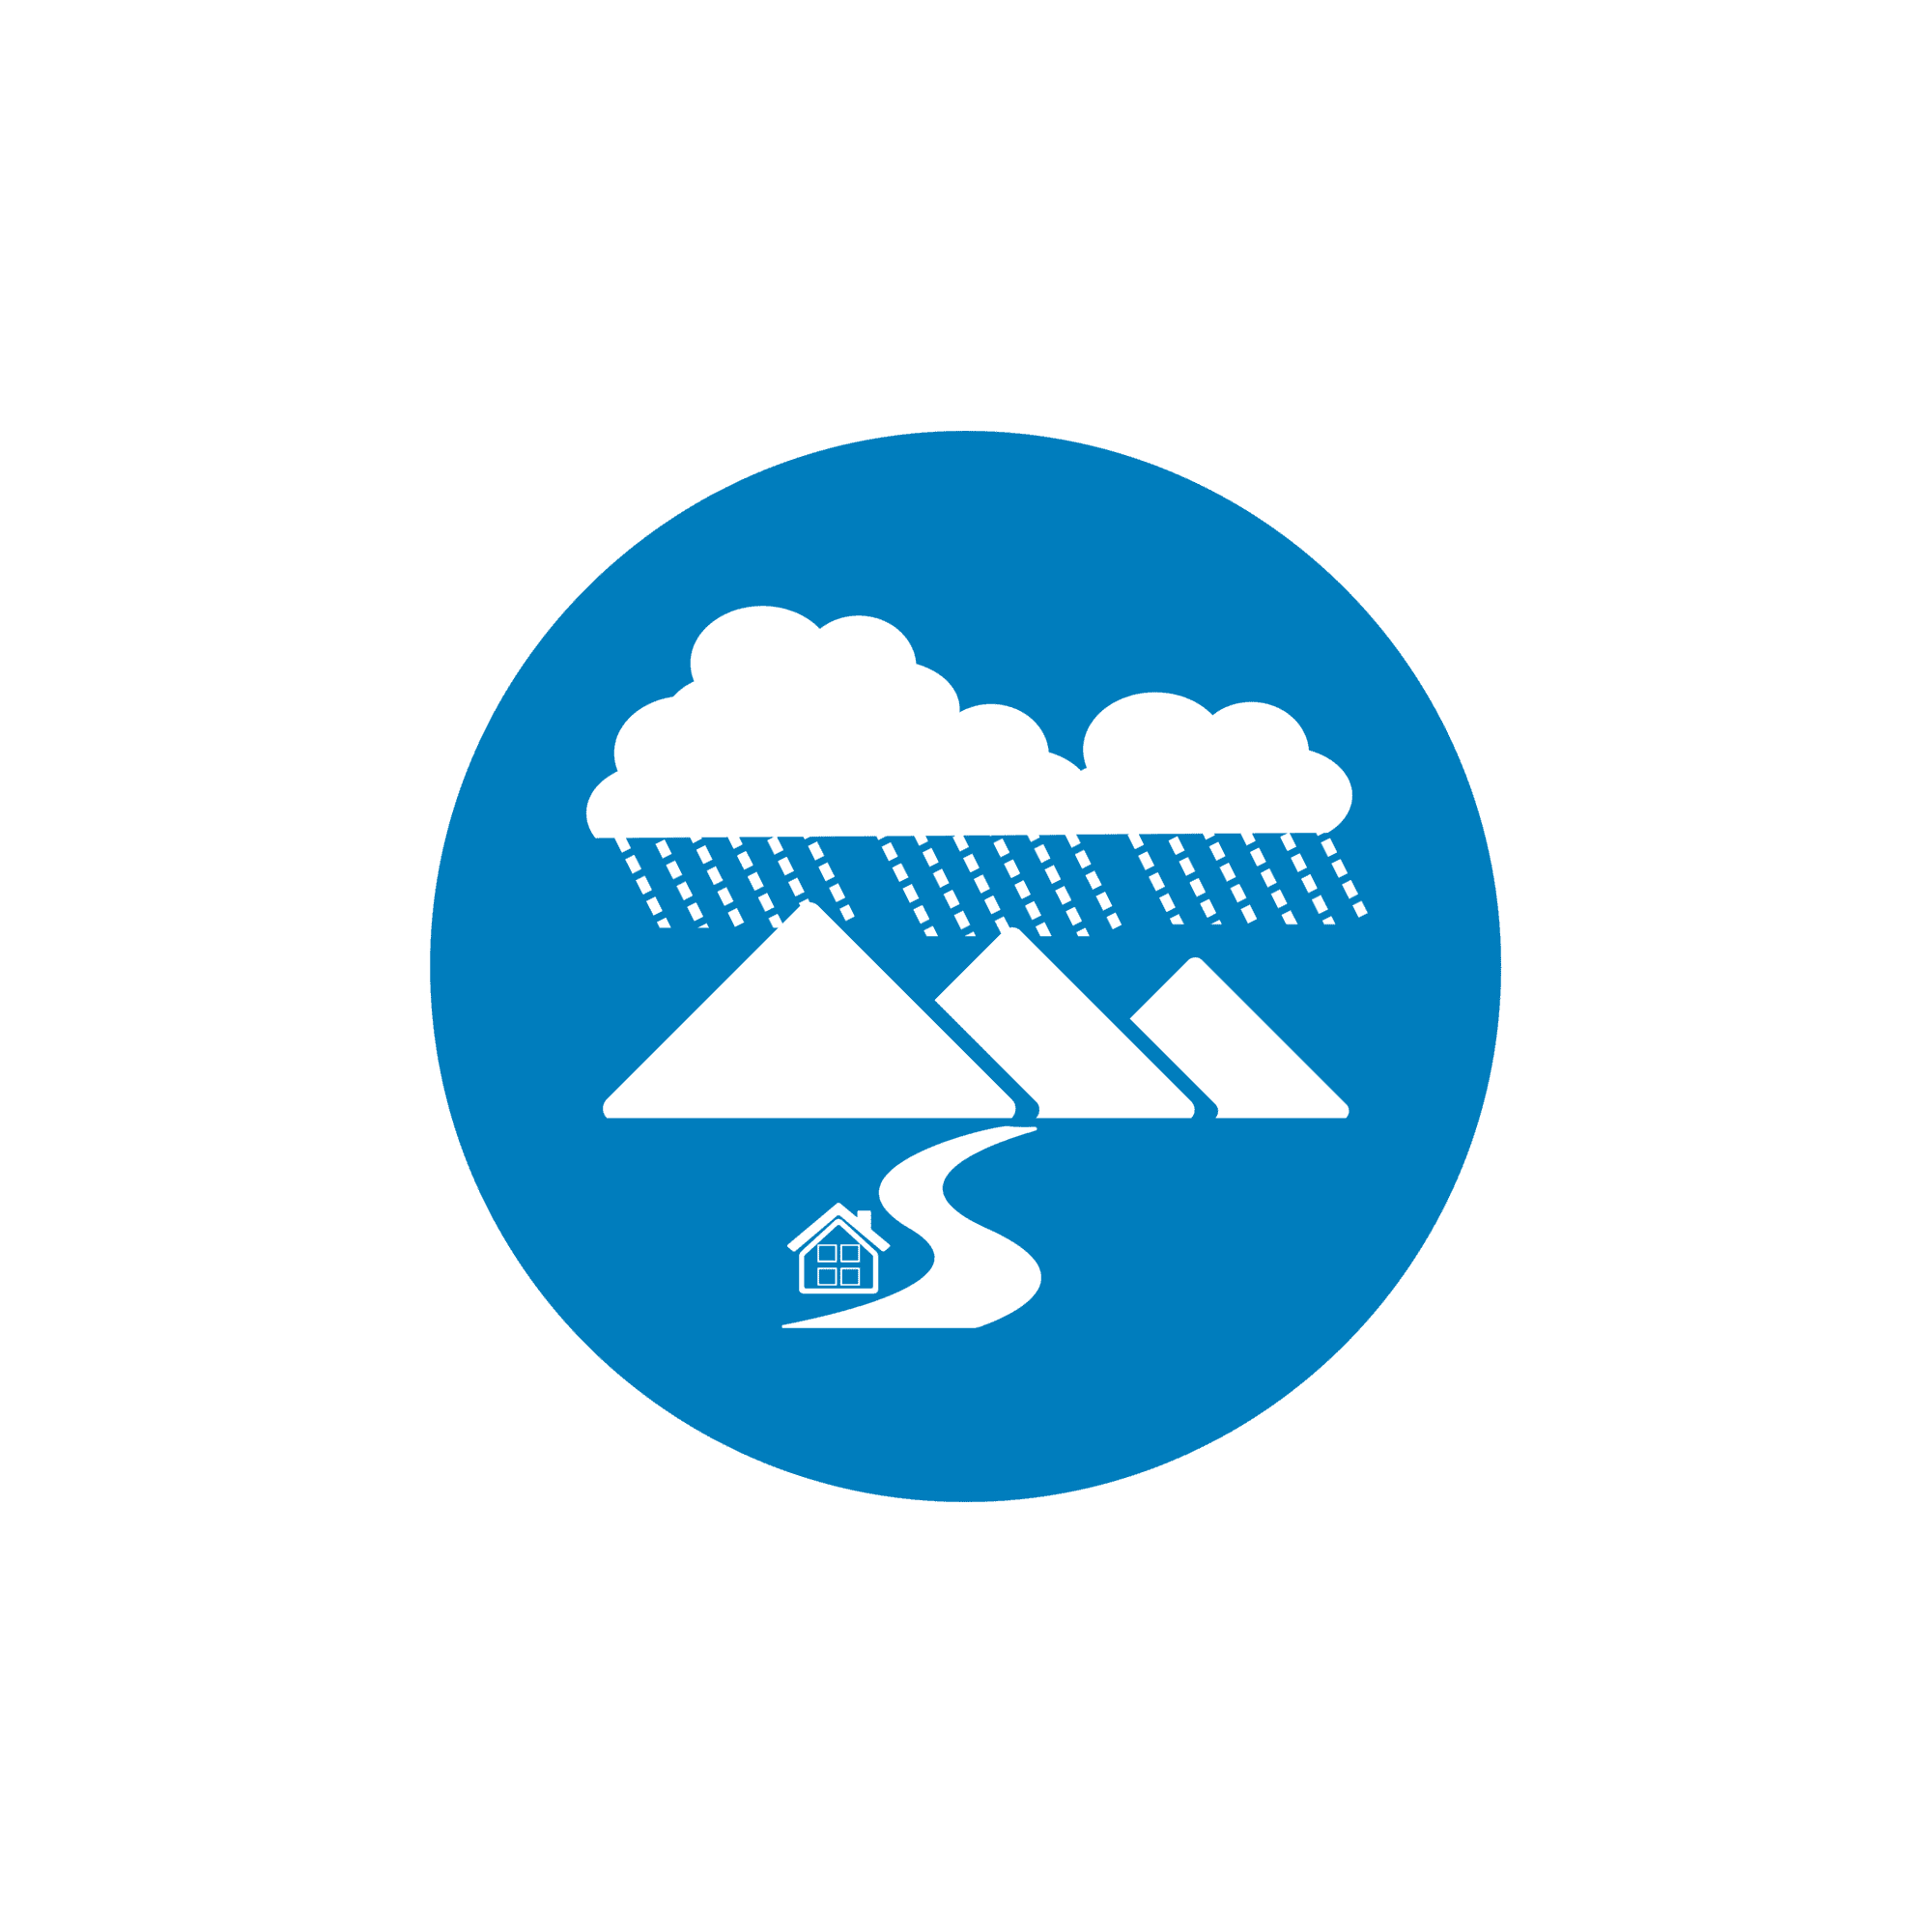 A blue circle icon with a white line design of rain over mountains and a valley to symbolize Flood Control.